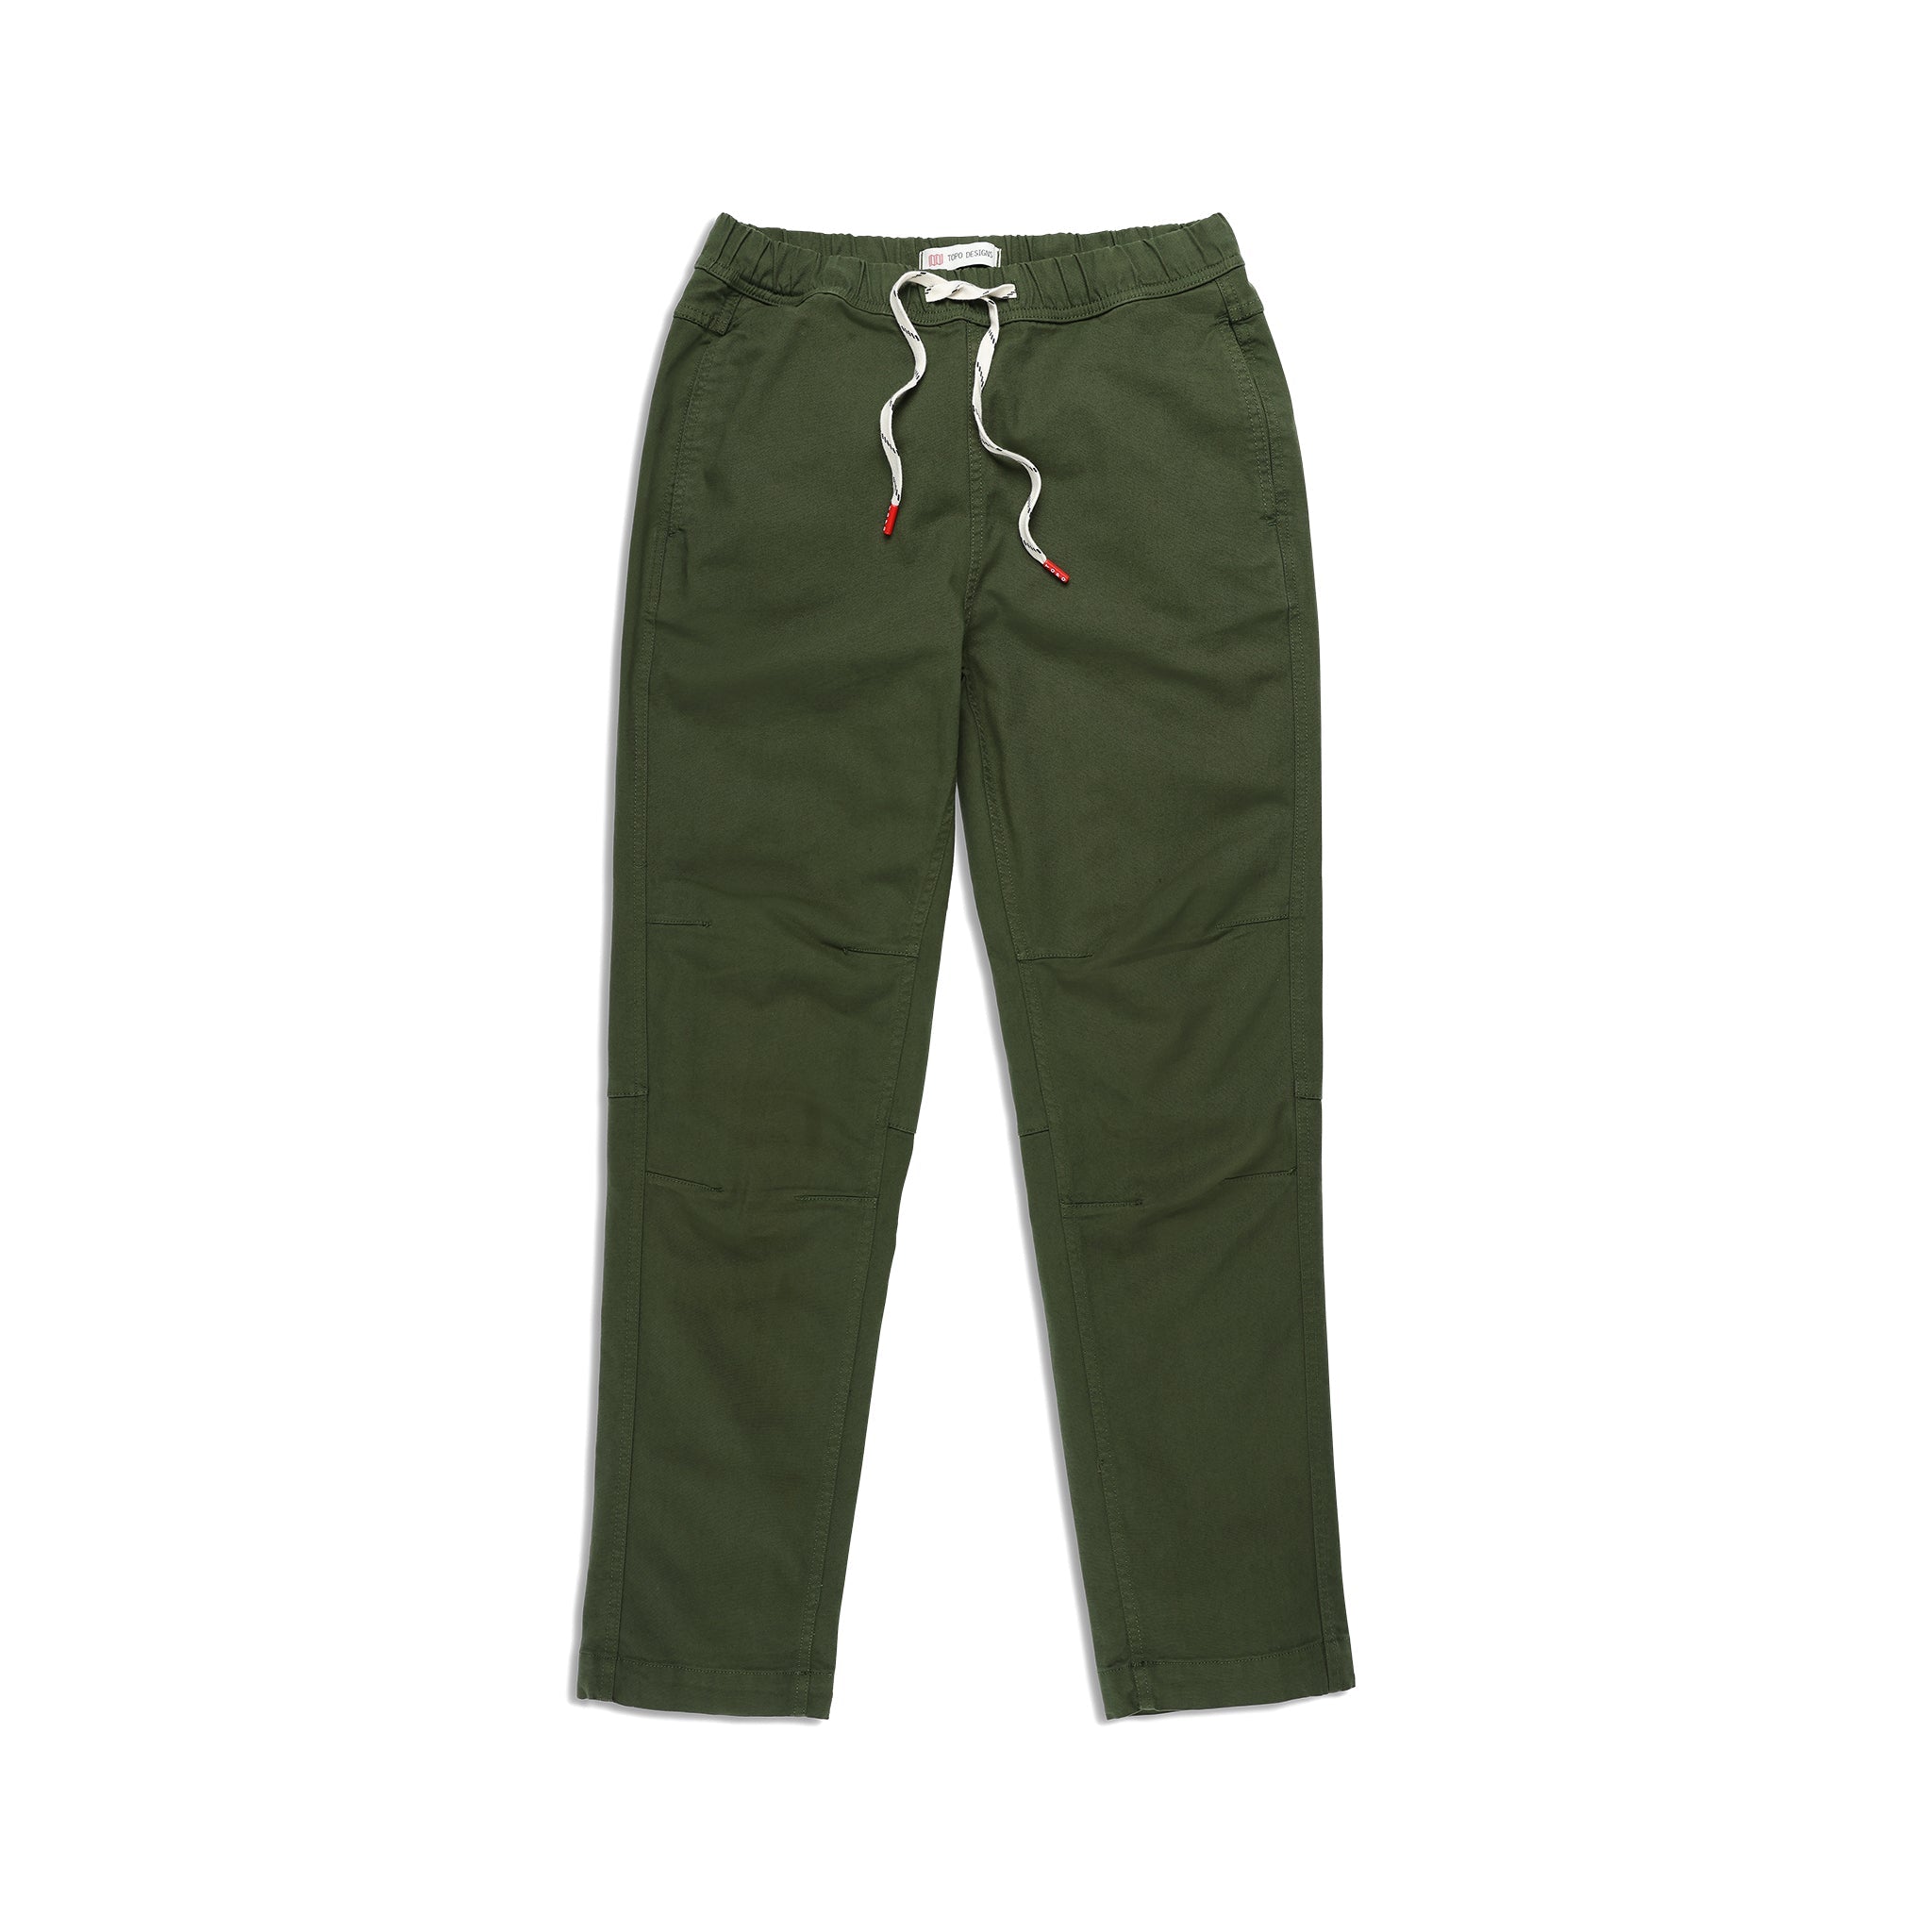 Front View of Topo Designs Dirt Pants Classic - Women's in "Olive"